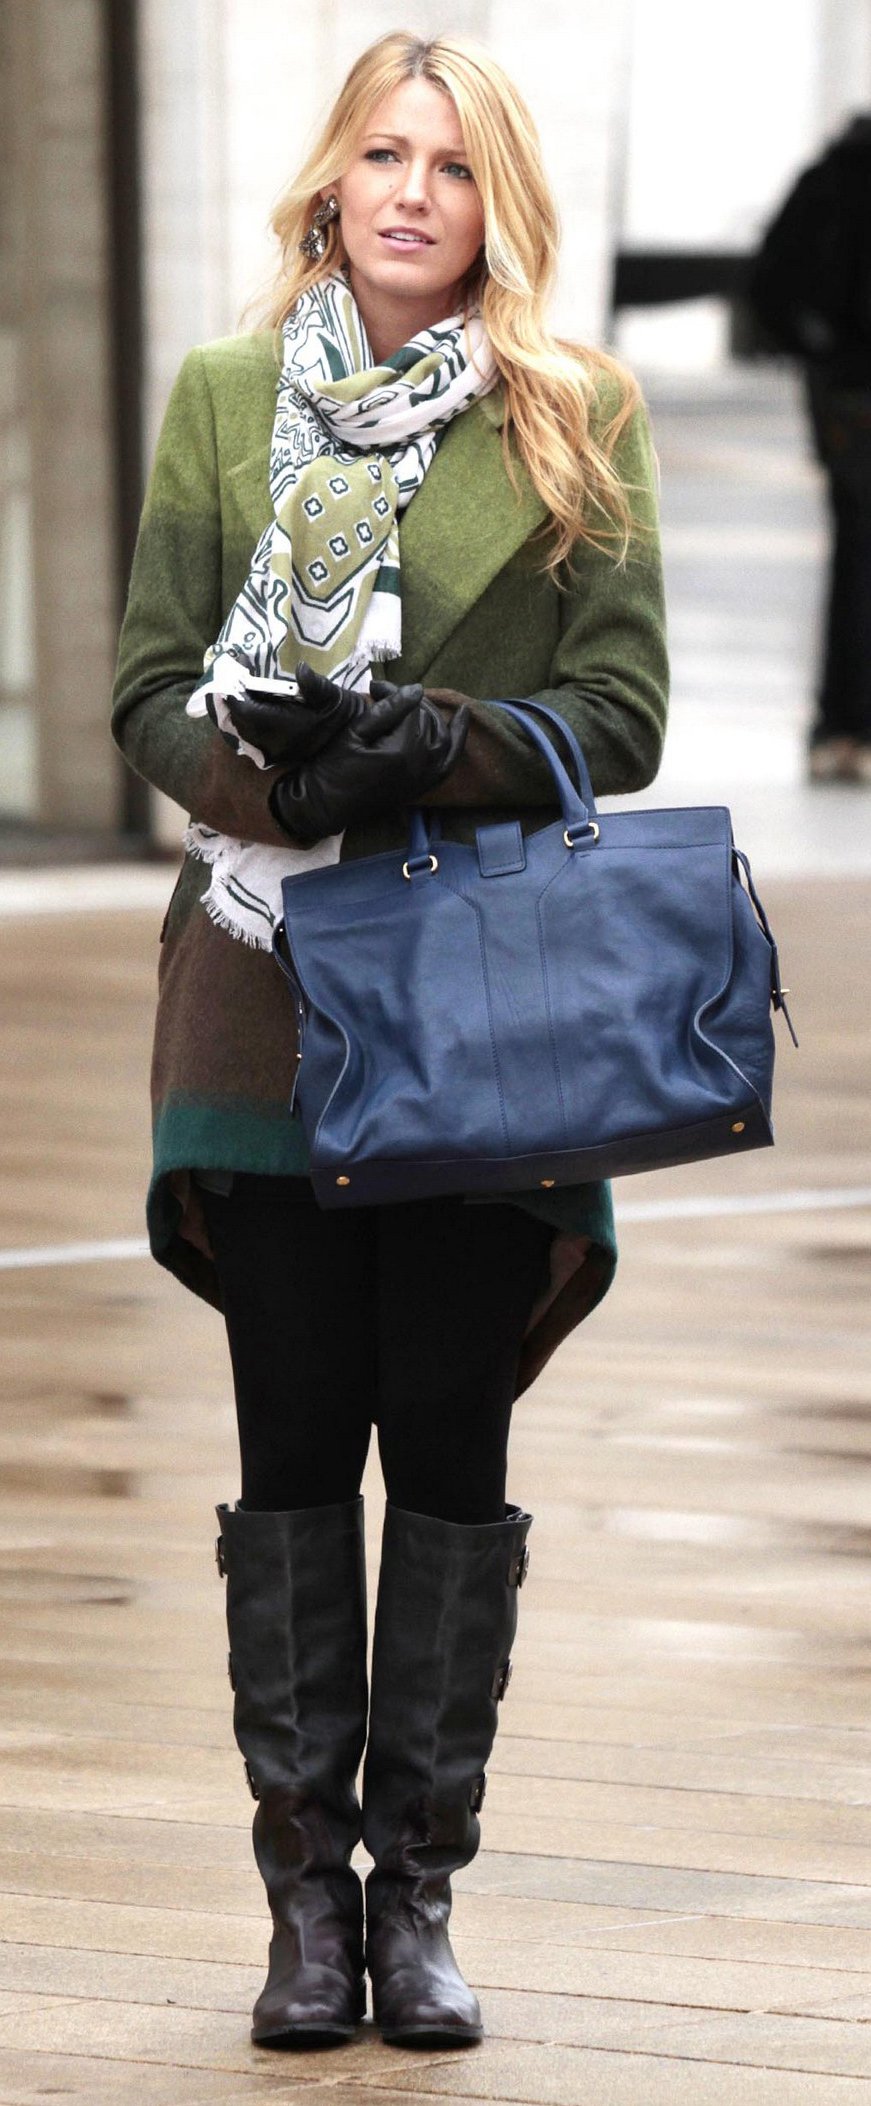 Serena’s green coat and scarf with blue handbag on Gossip Girl